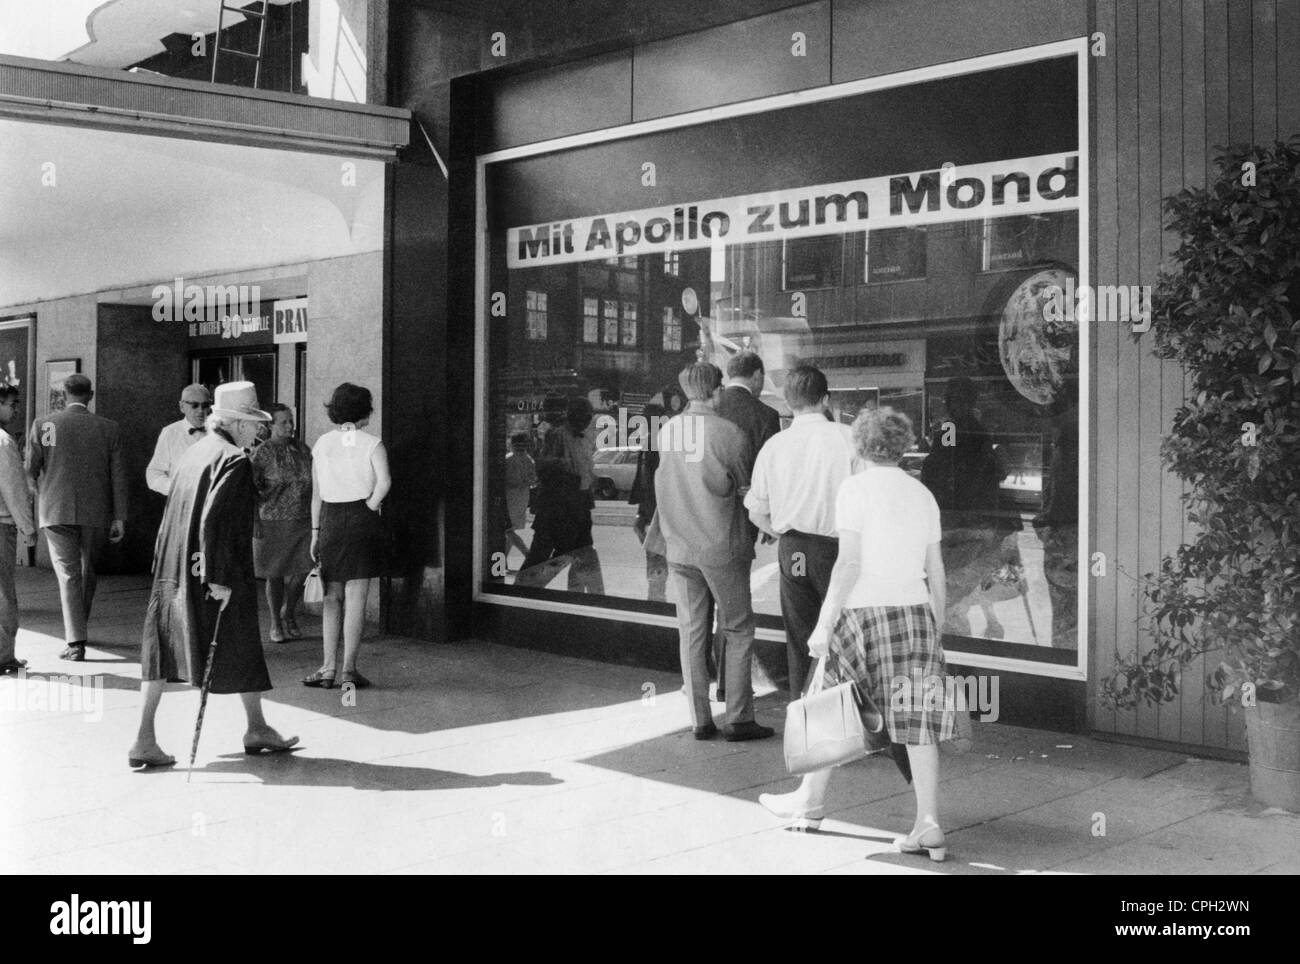 astronautics, missions, Apollo 11, launch, people watching the launch on a TV in a display window, Hamburg, 16.7.1969, "Mit Apollo zum Mond" (With Apollo to the Moon), Additional-Rights-Clearences-Not Available Stock Photo